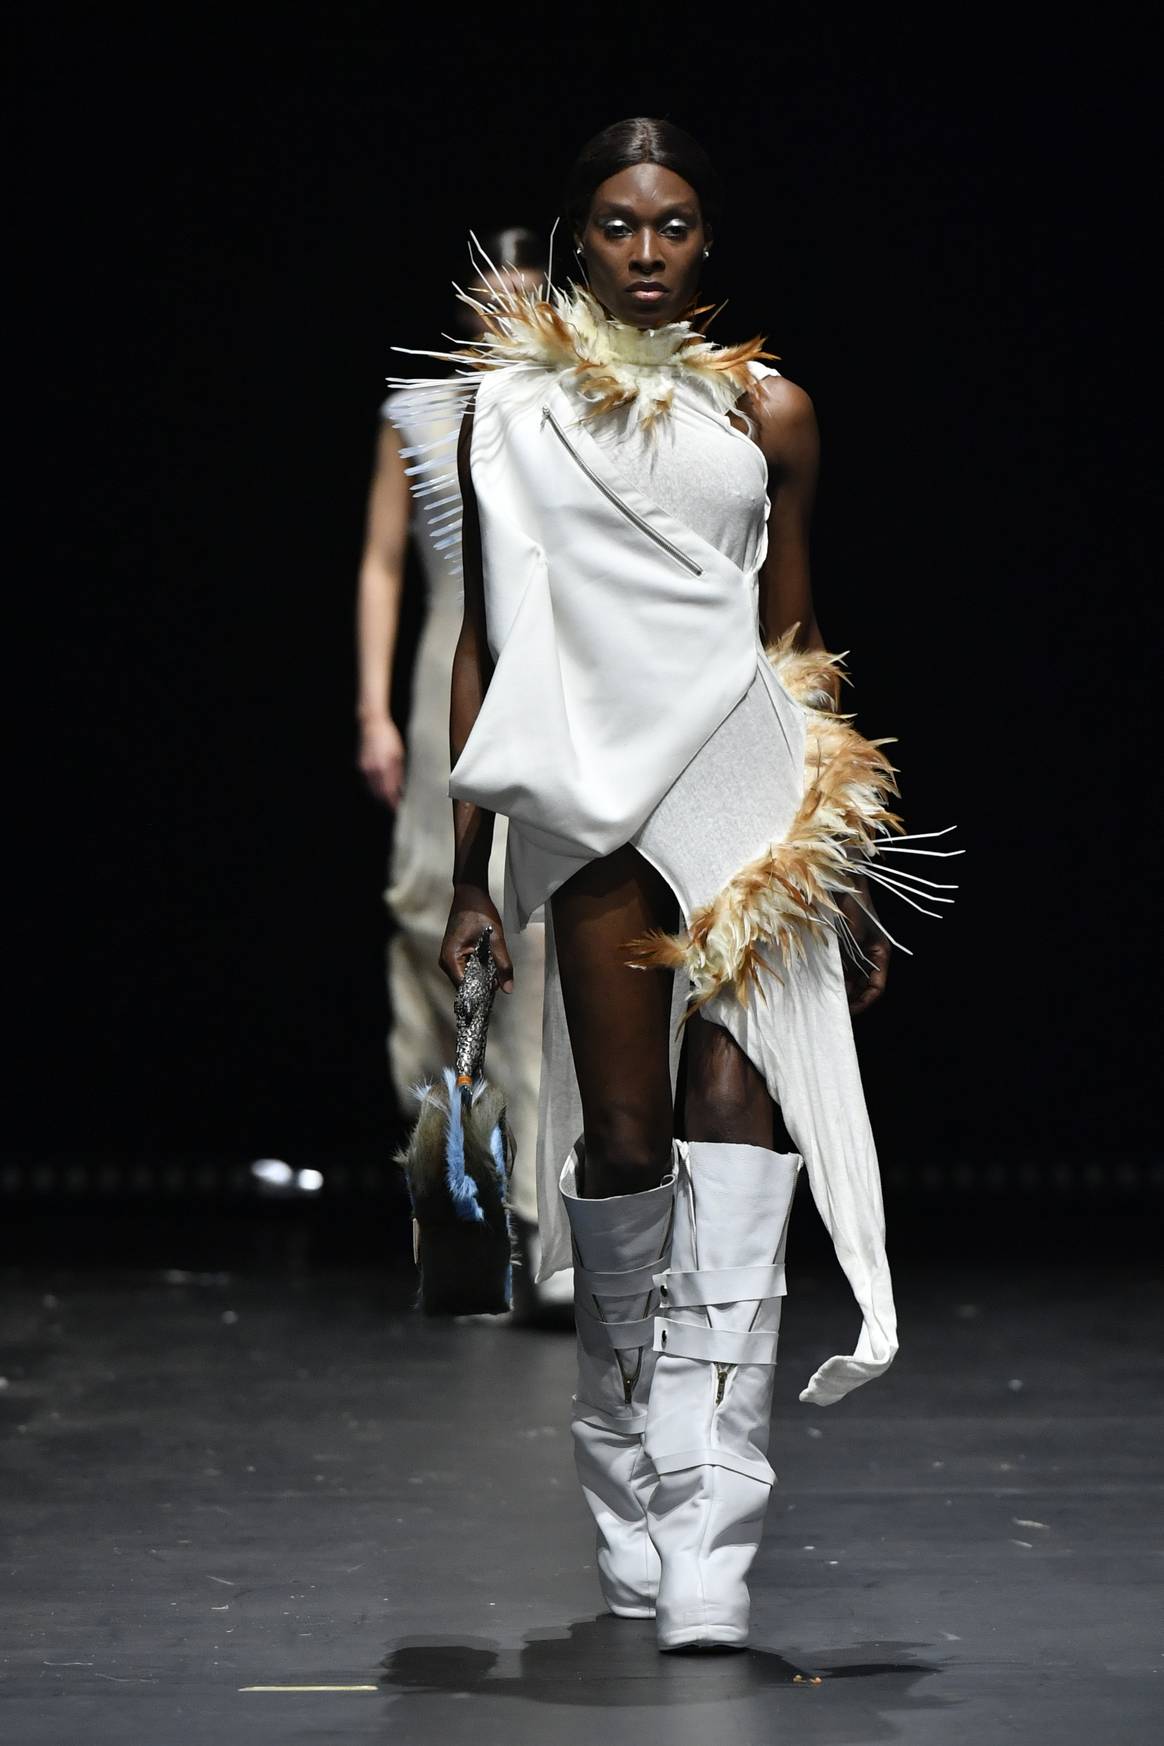 A look by Tristan Pedrosa, Antwerp fashion department Show 2024.